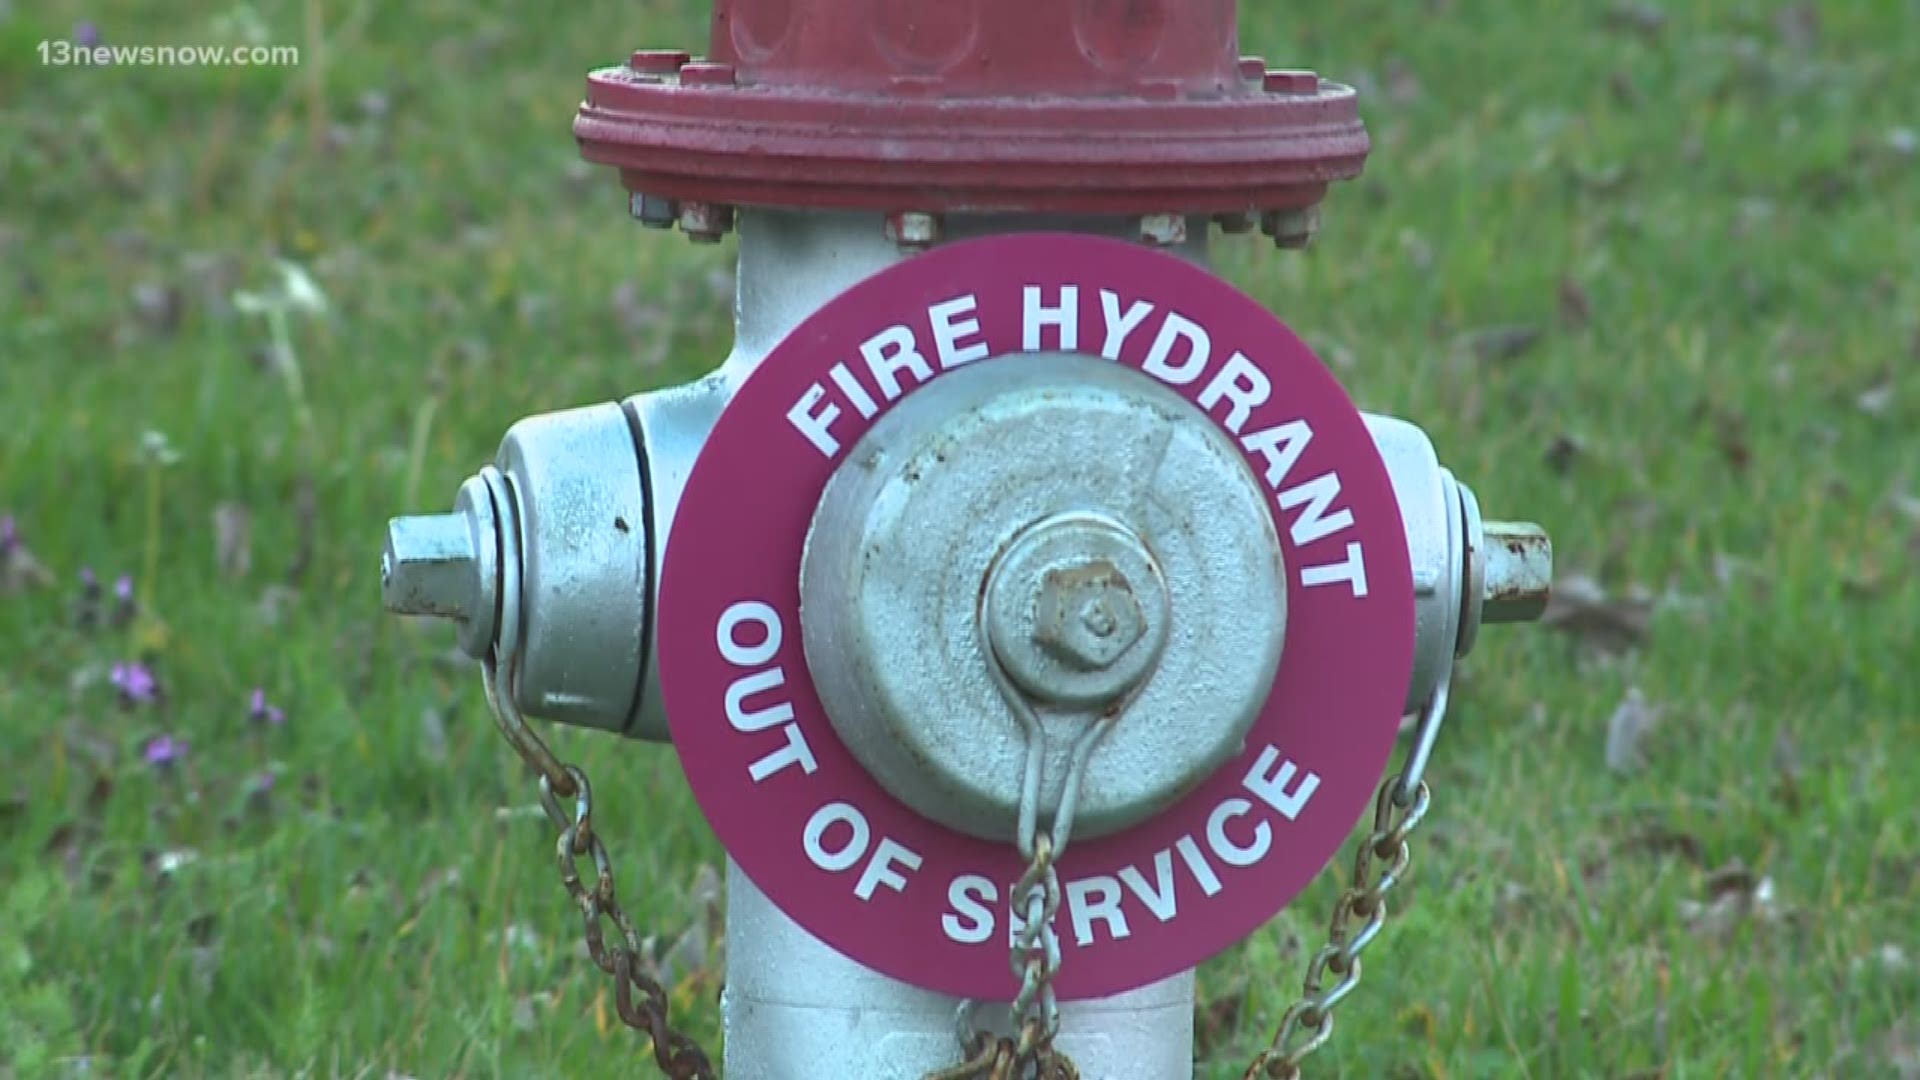 Our 13News Now investigation found that the number of broken hydrants in Portsmouth is more than double the number of out-of-service hydrants in all other Hampton Roads cities combined.